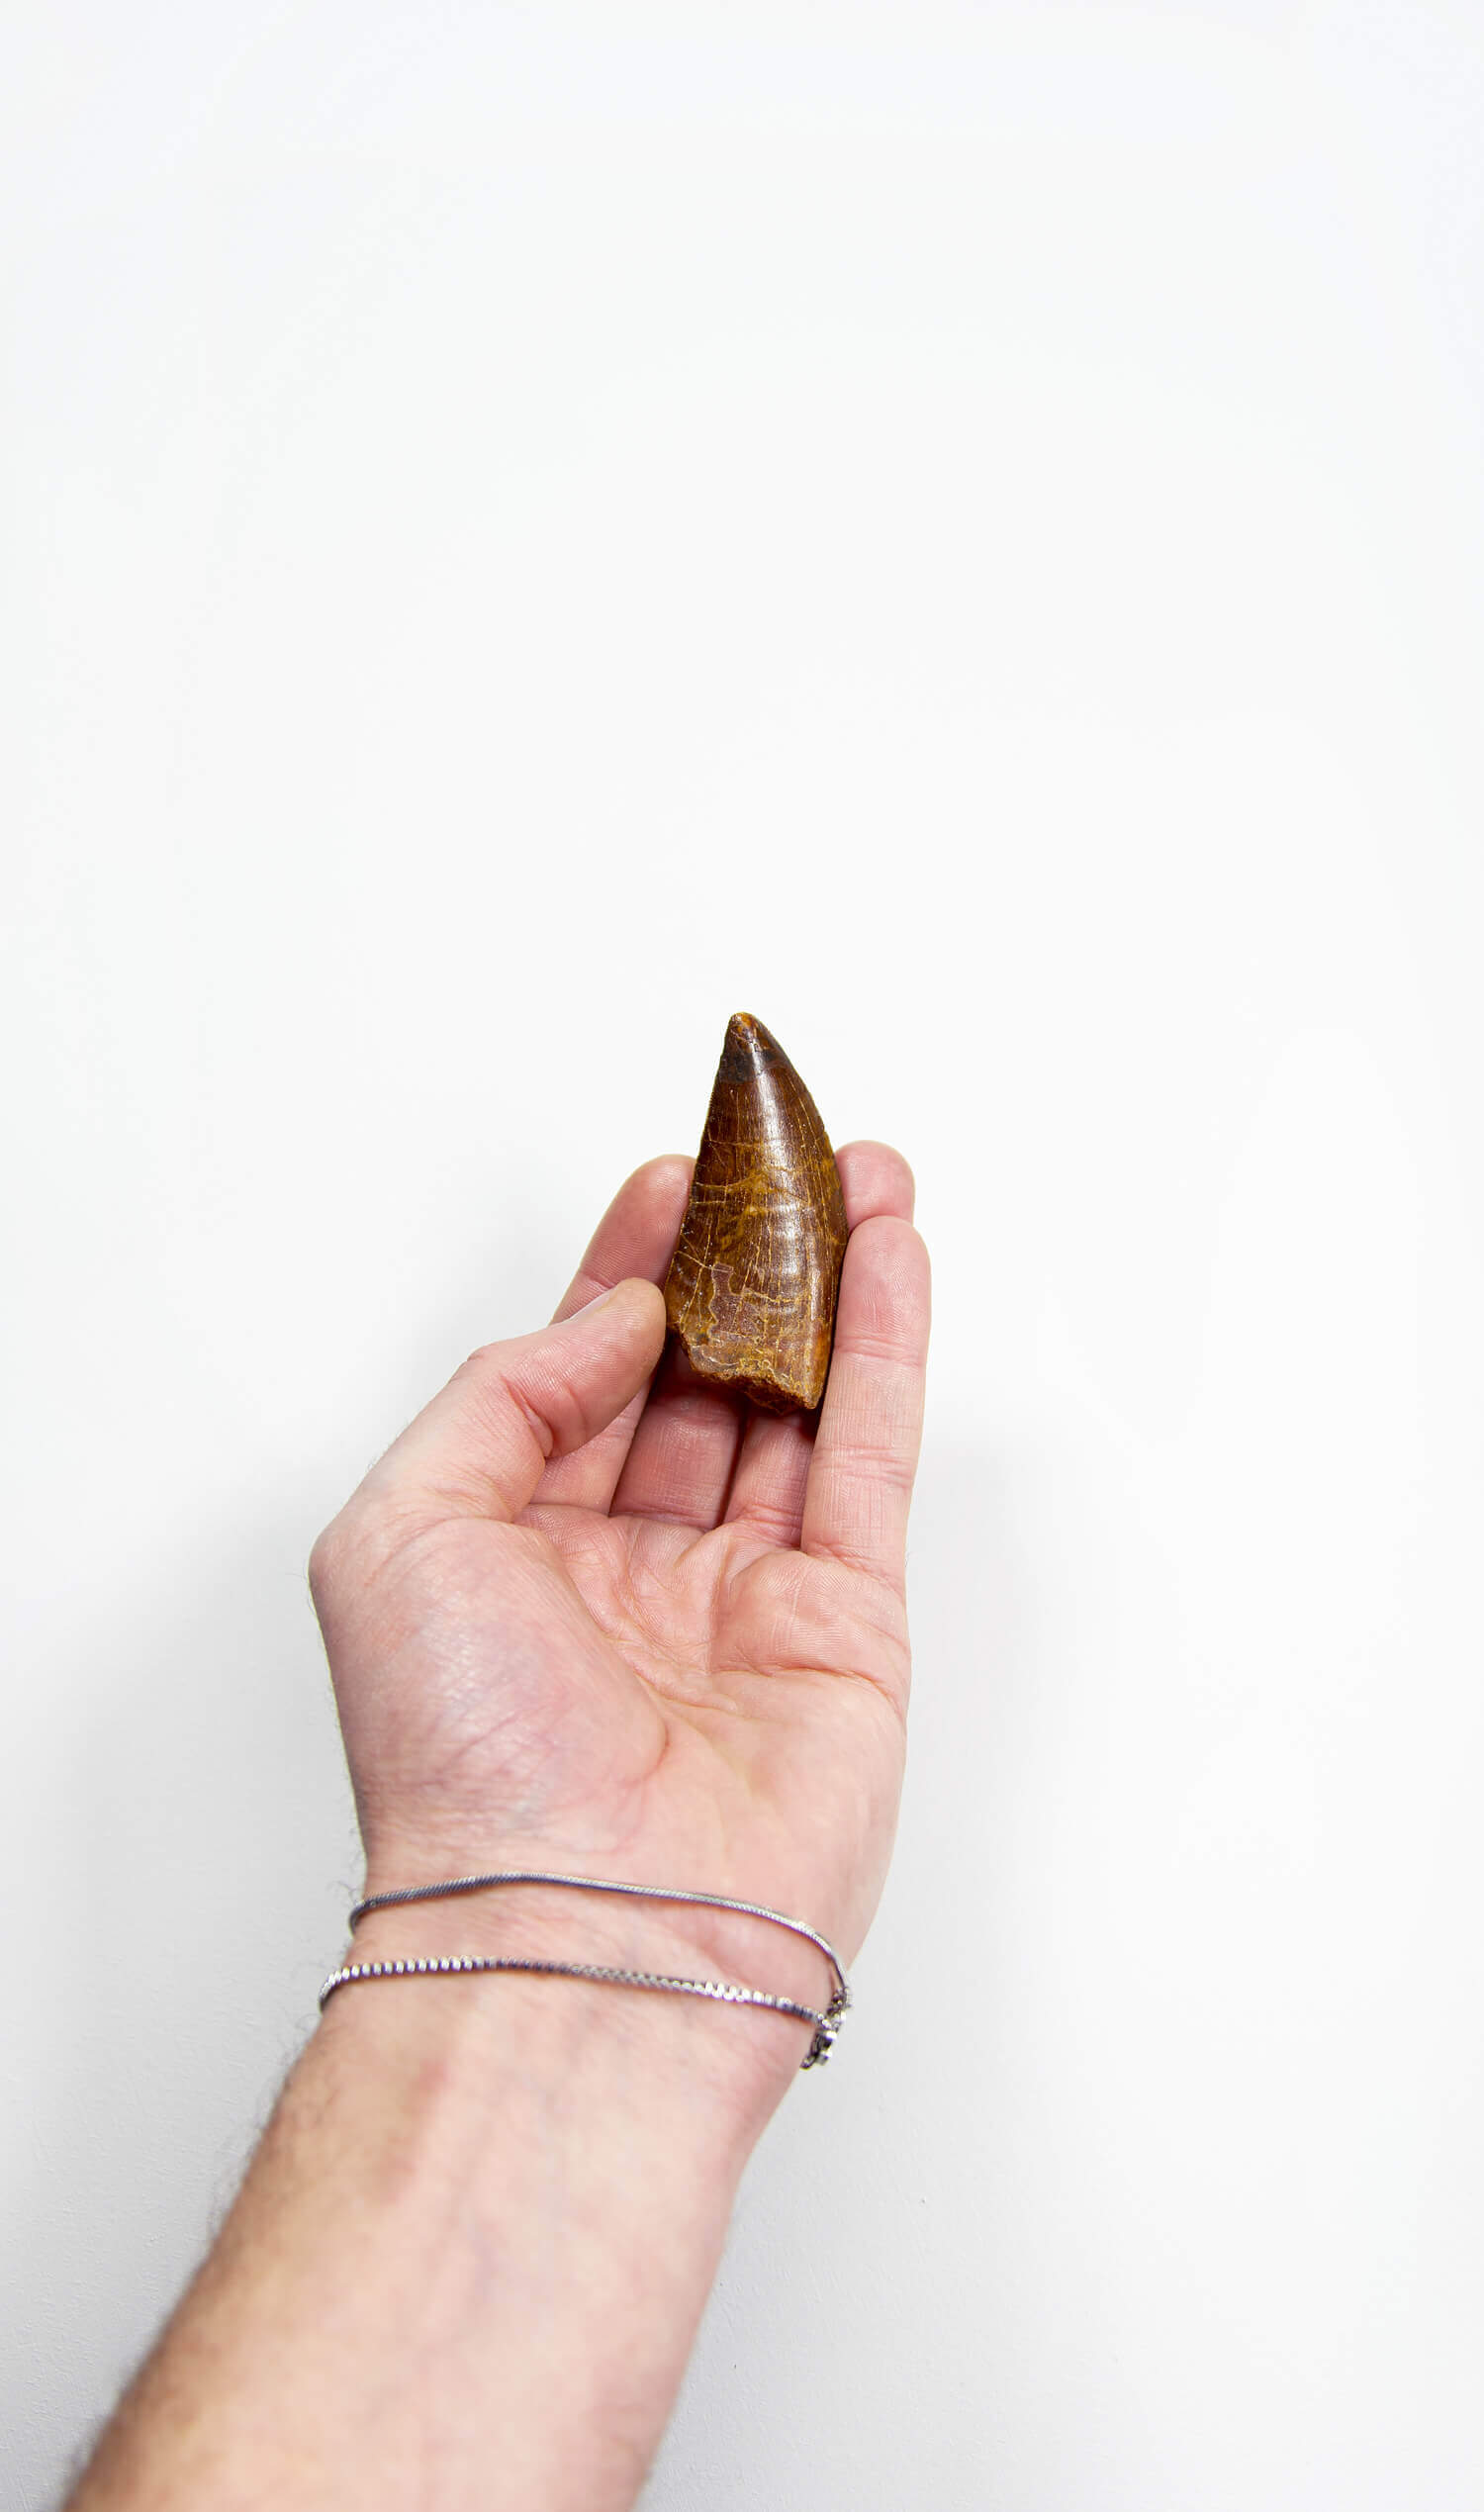 real fossil dinosaur carcharodontosaurus tooth for sale at the uk fossil store 42